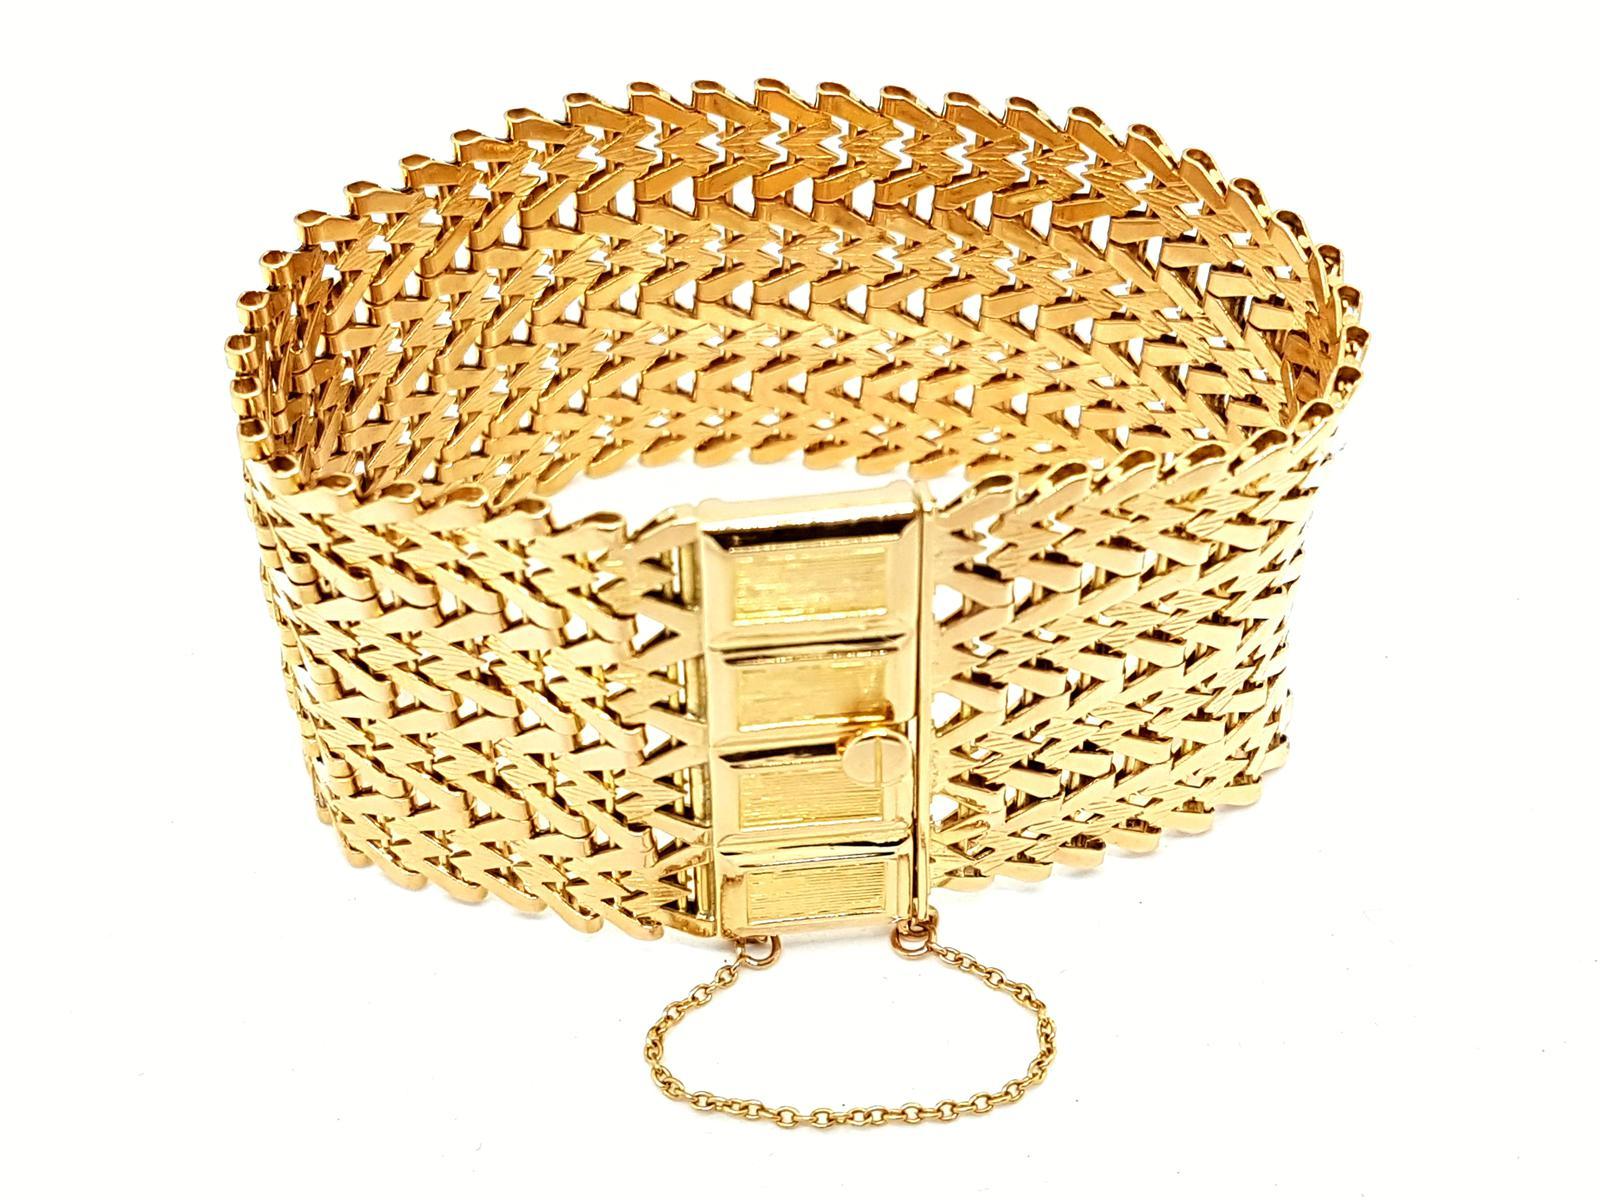 Cuff Yellow gold 750 mils (18 carats). woven mesh. length: 18 cm. width: 3.2 cm. safety chain. punched. Weight: 61.34 g. excellent condition
